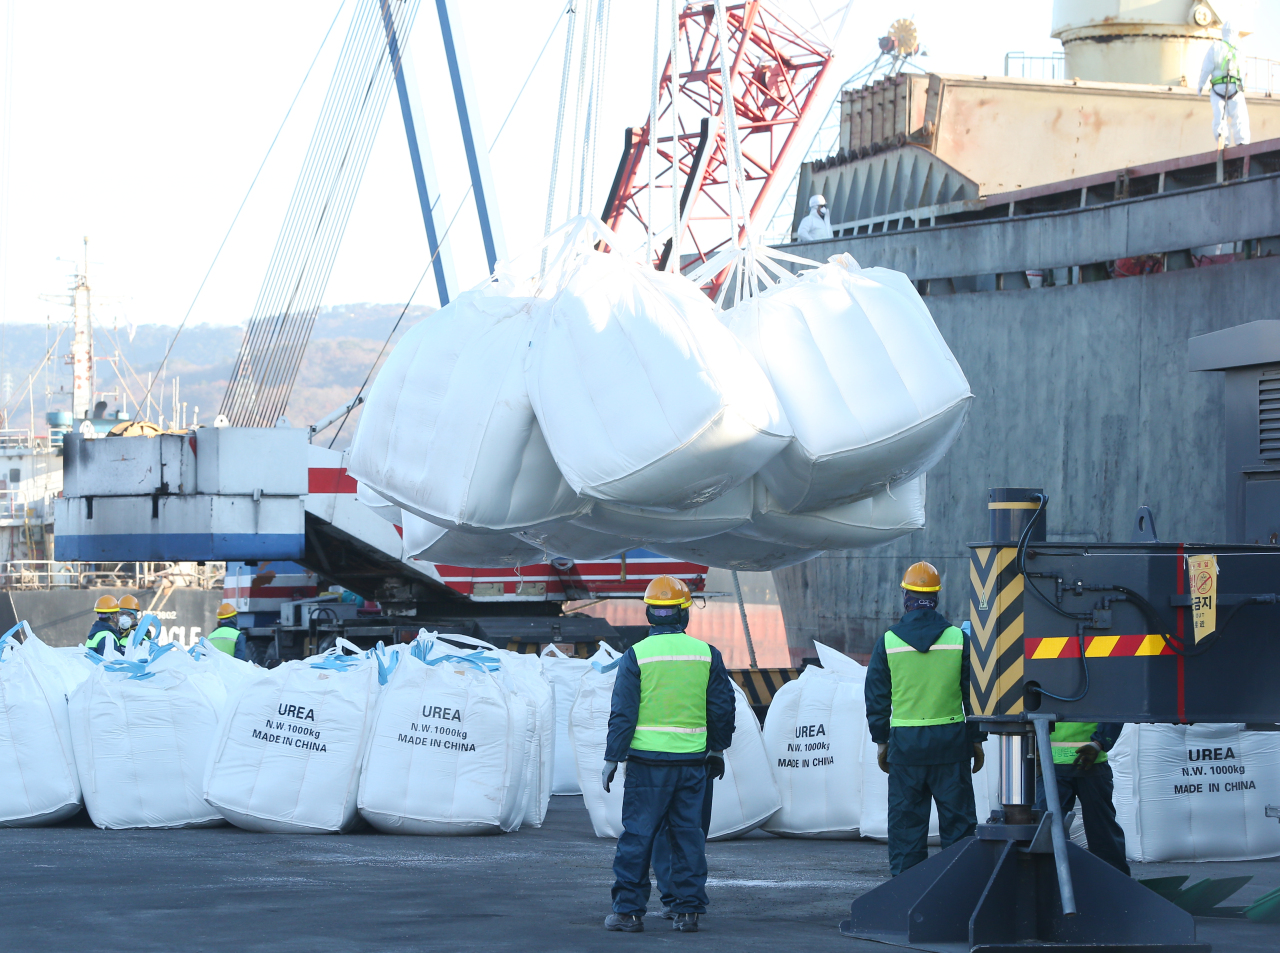 A Chinese freighter unloads 3,000 tons of urea solution for cars at a quay in Ulsan, 410 kilometers southeast of Seoul, last Thursday, in the wake of China's sudden export curbs on the material that caused chaos in the country's transportation and logistics sector. (Yonhap)